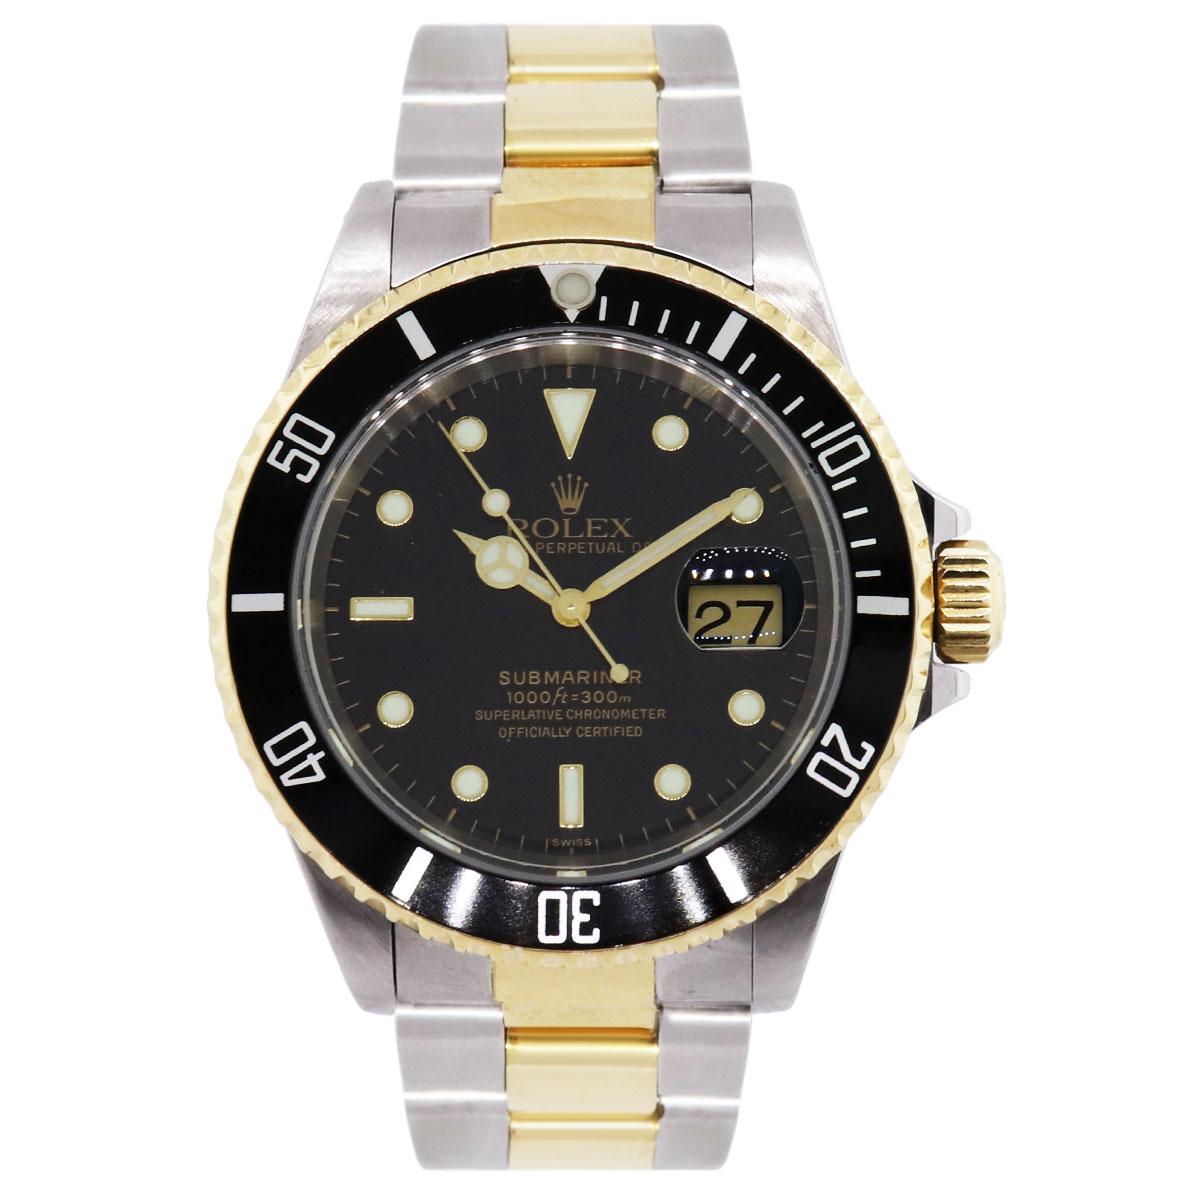 Brand: Rolex
MPN: 16613
Model: Submariner
Case Material: Stainless steel
Case Diameter: 40mm
Crystal: Scratch resistant sapphire
Bezel: black unidirectional bezel (factory)
Dial: Black dial (factory)
Bracelet: Stainless steel and 18k yellow gold